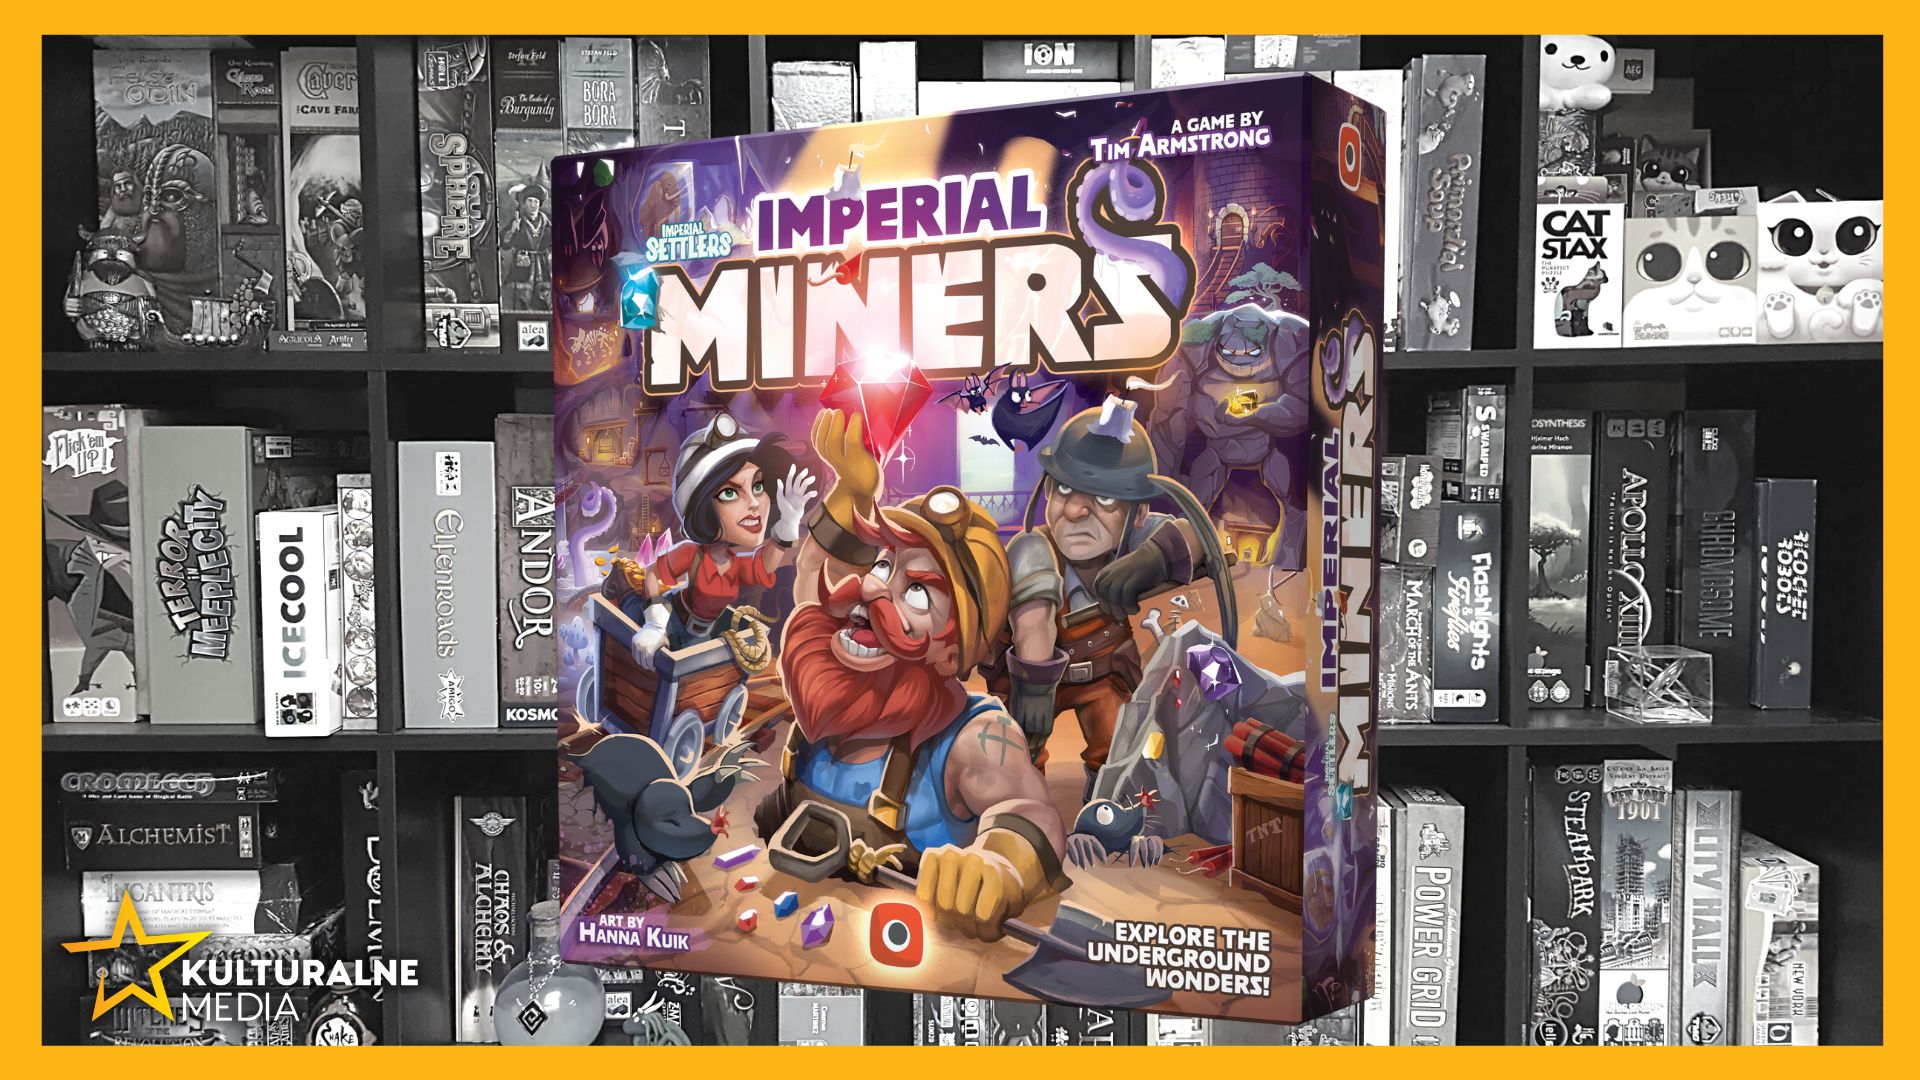 Imperial miners